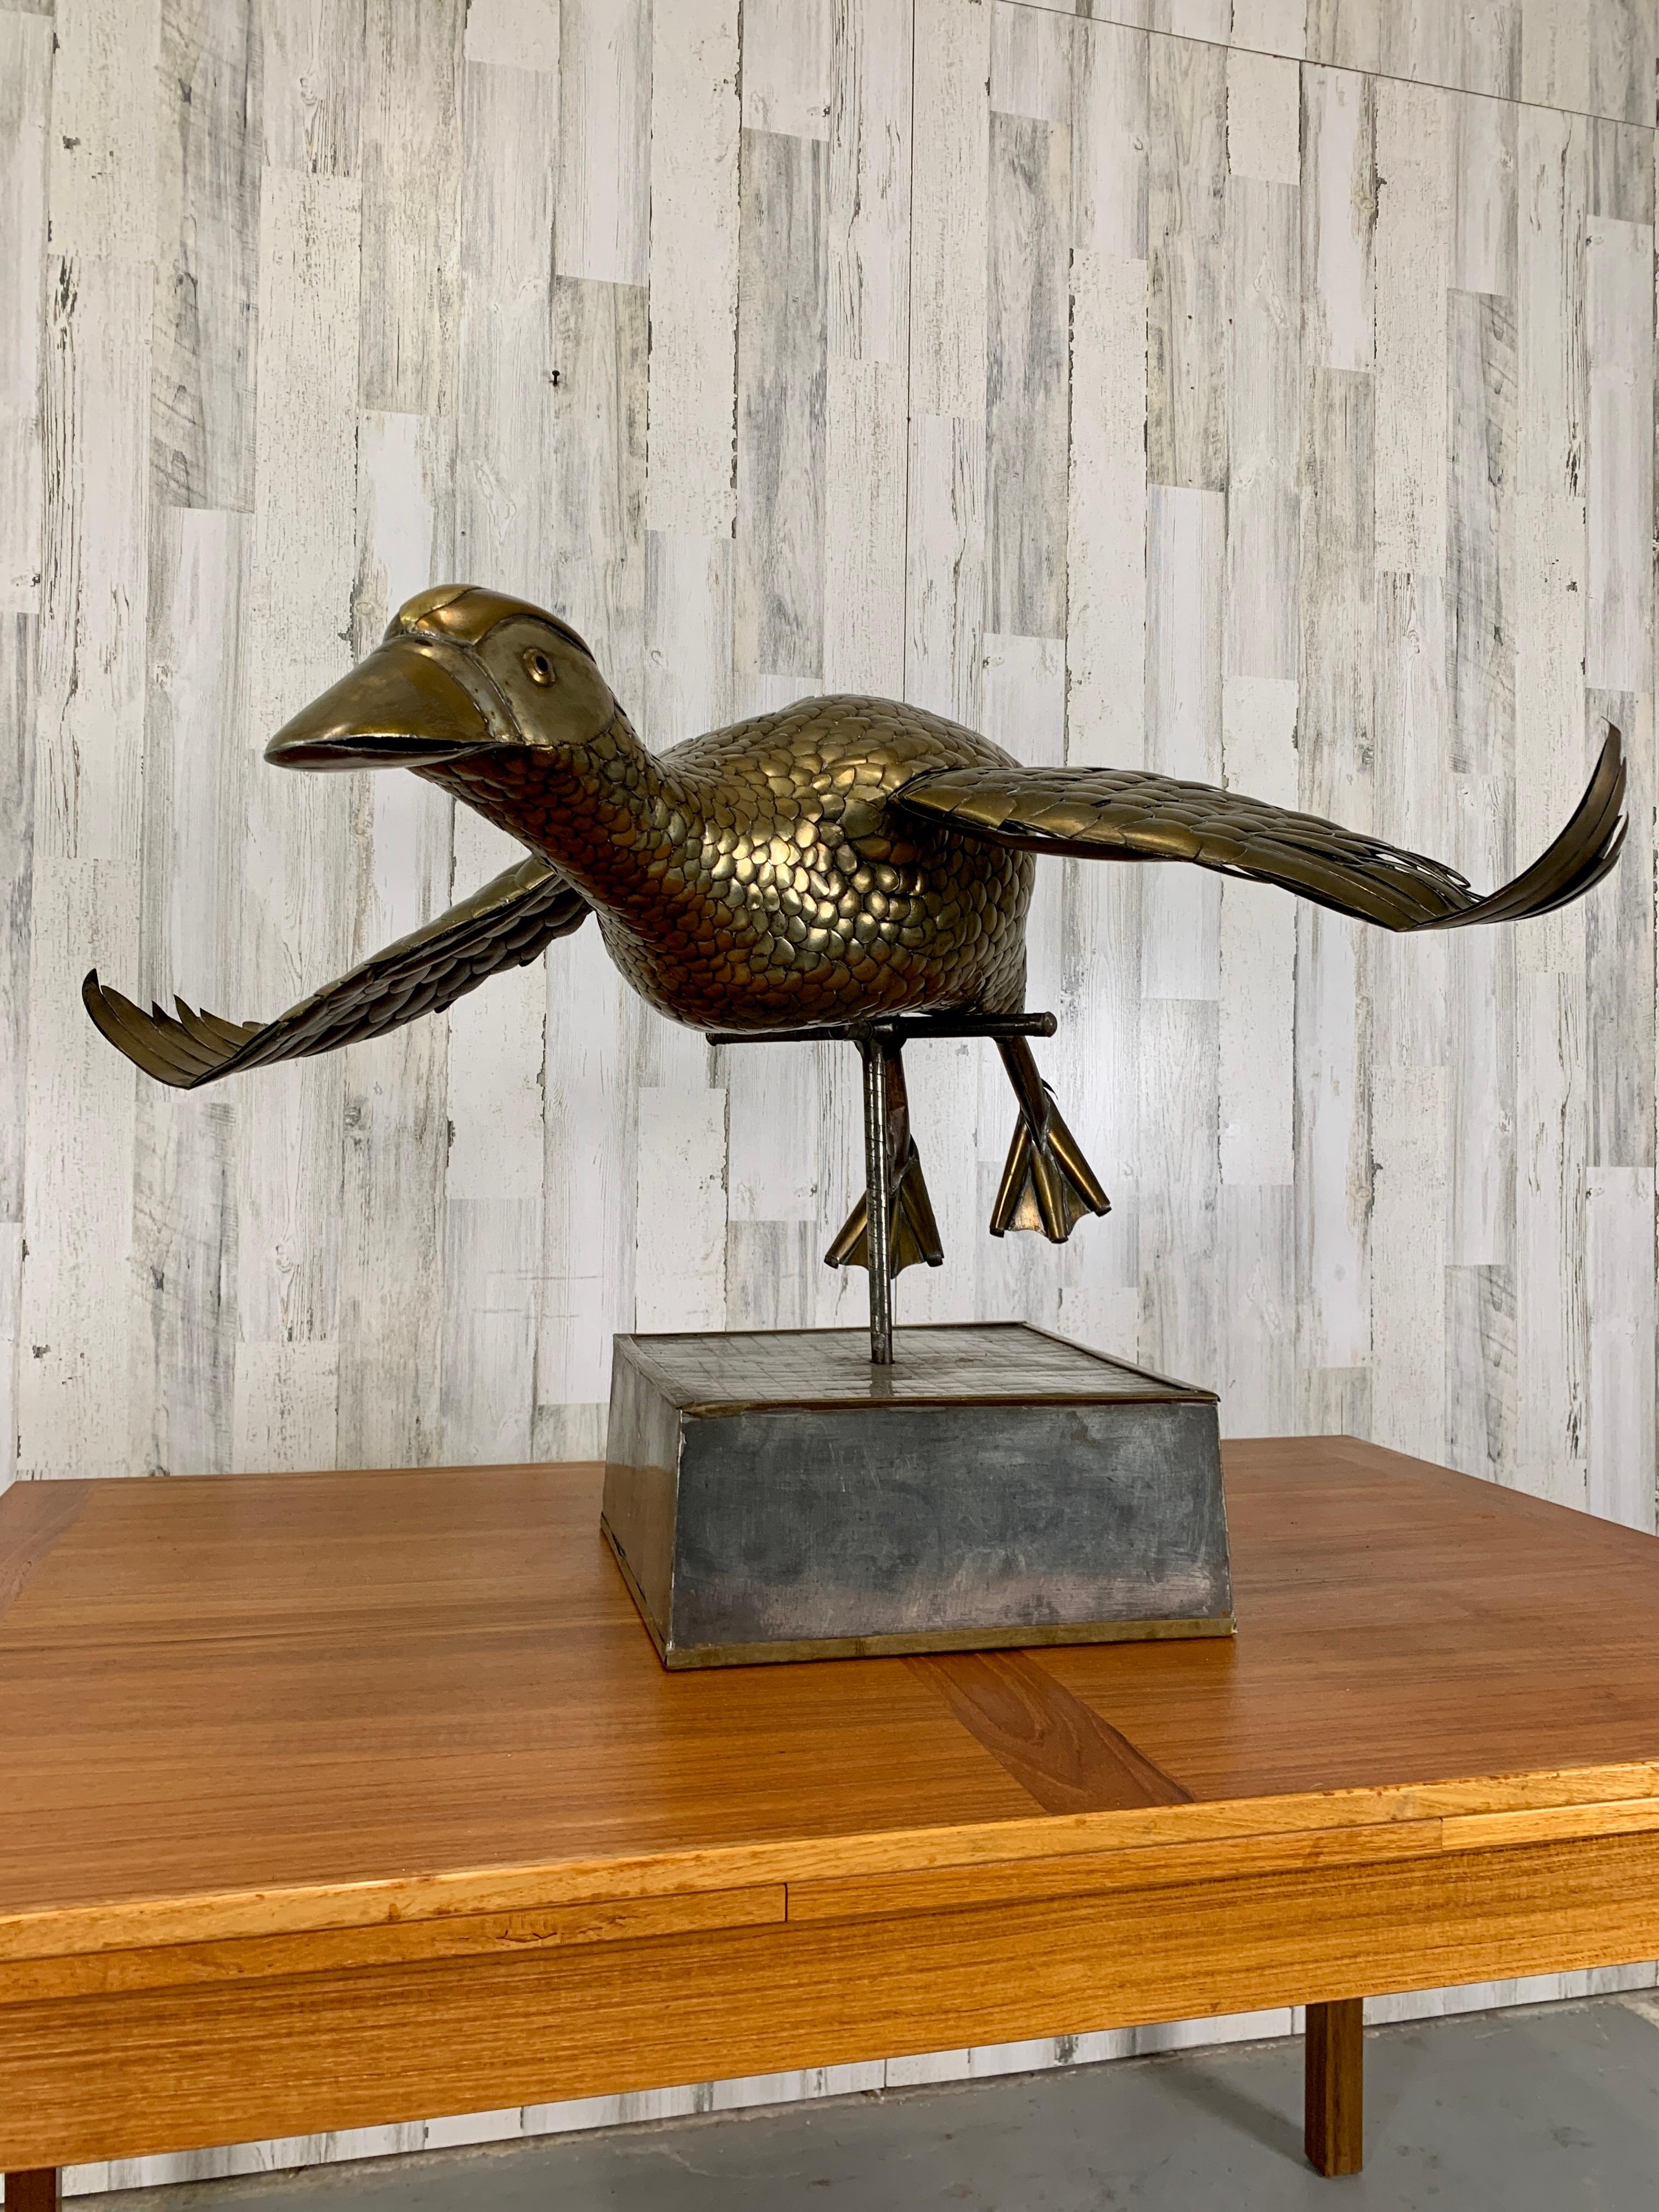 Limited Edition 2/100 Sergio Bustamante Flying Duck Sculpture 1